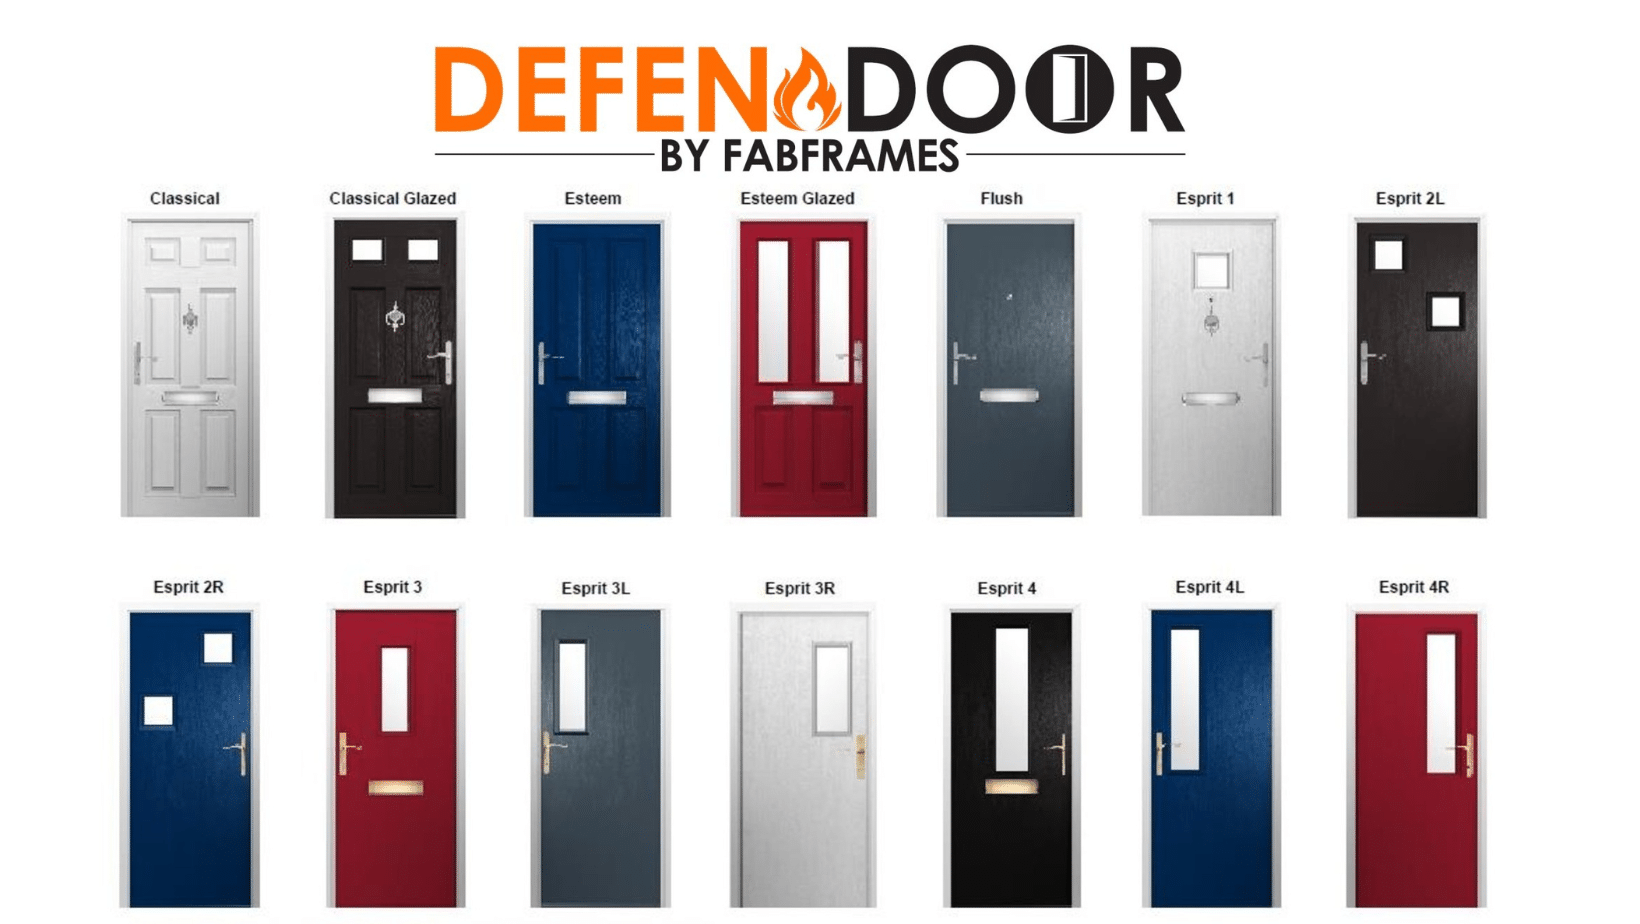 Torquay Fire Doors designs and colours available